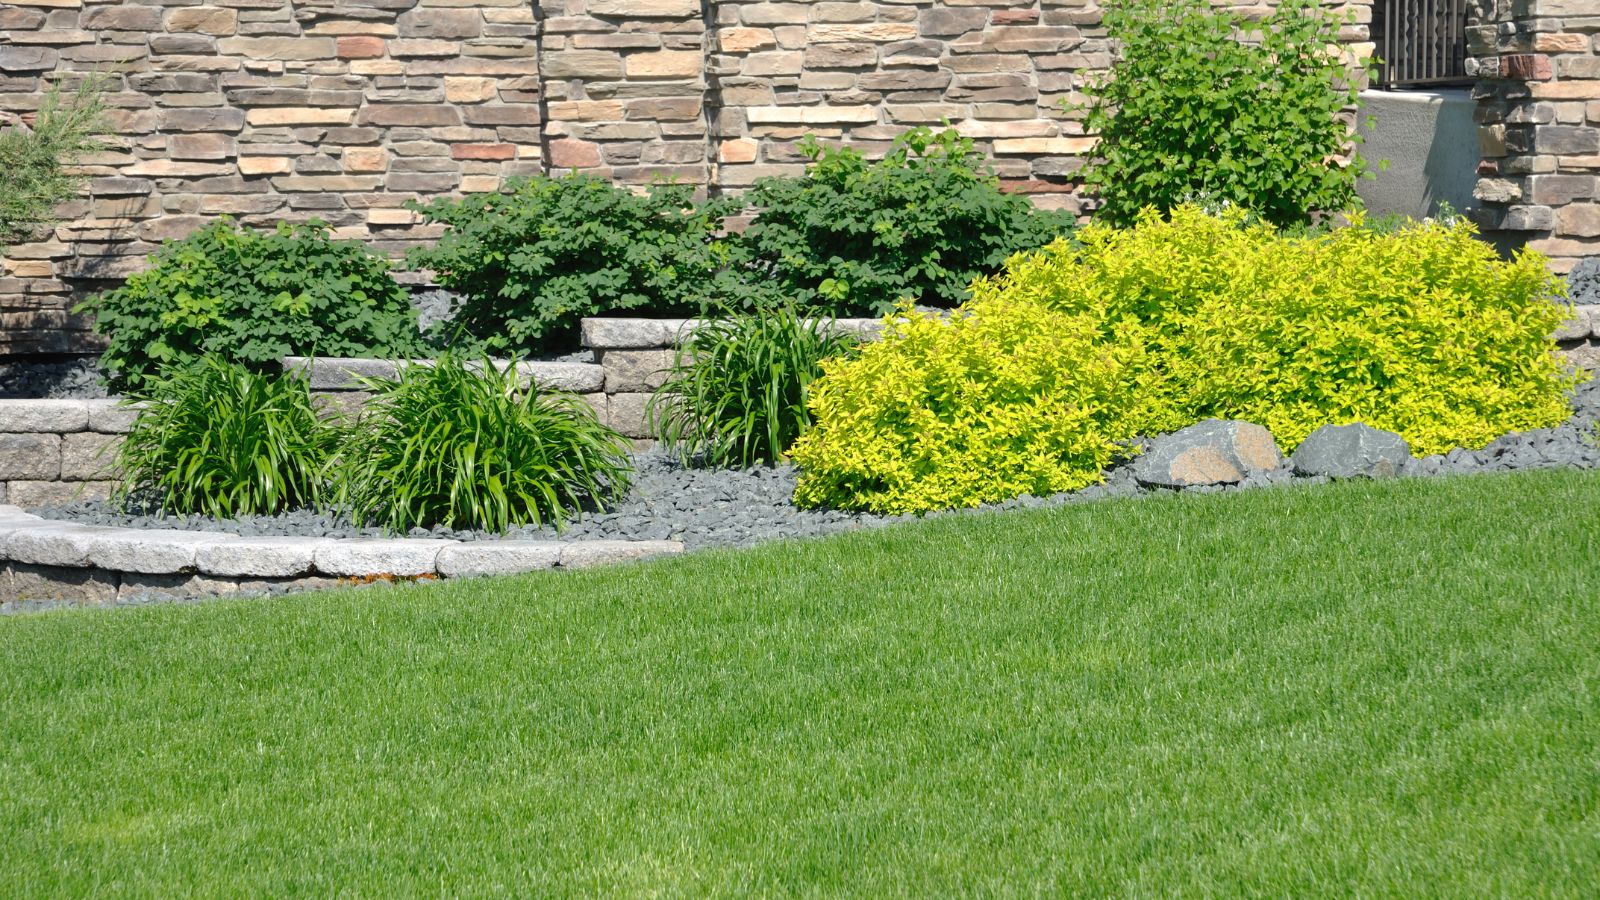 A Retaining Wall in Your Front Yard